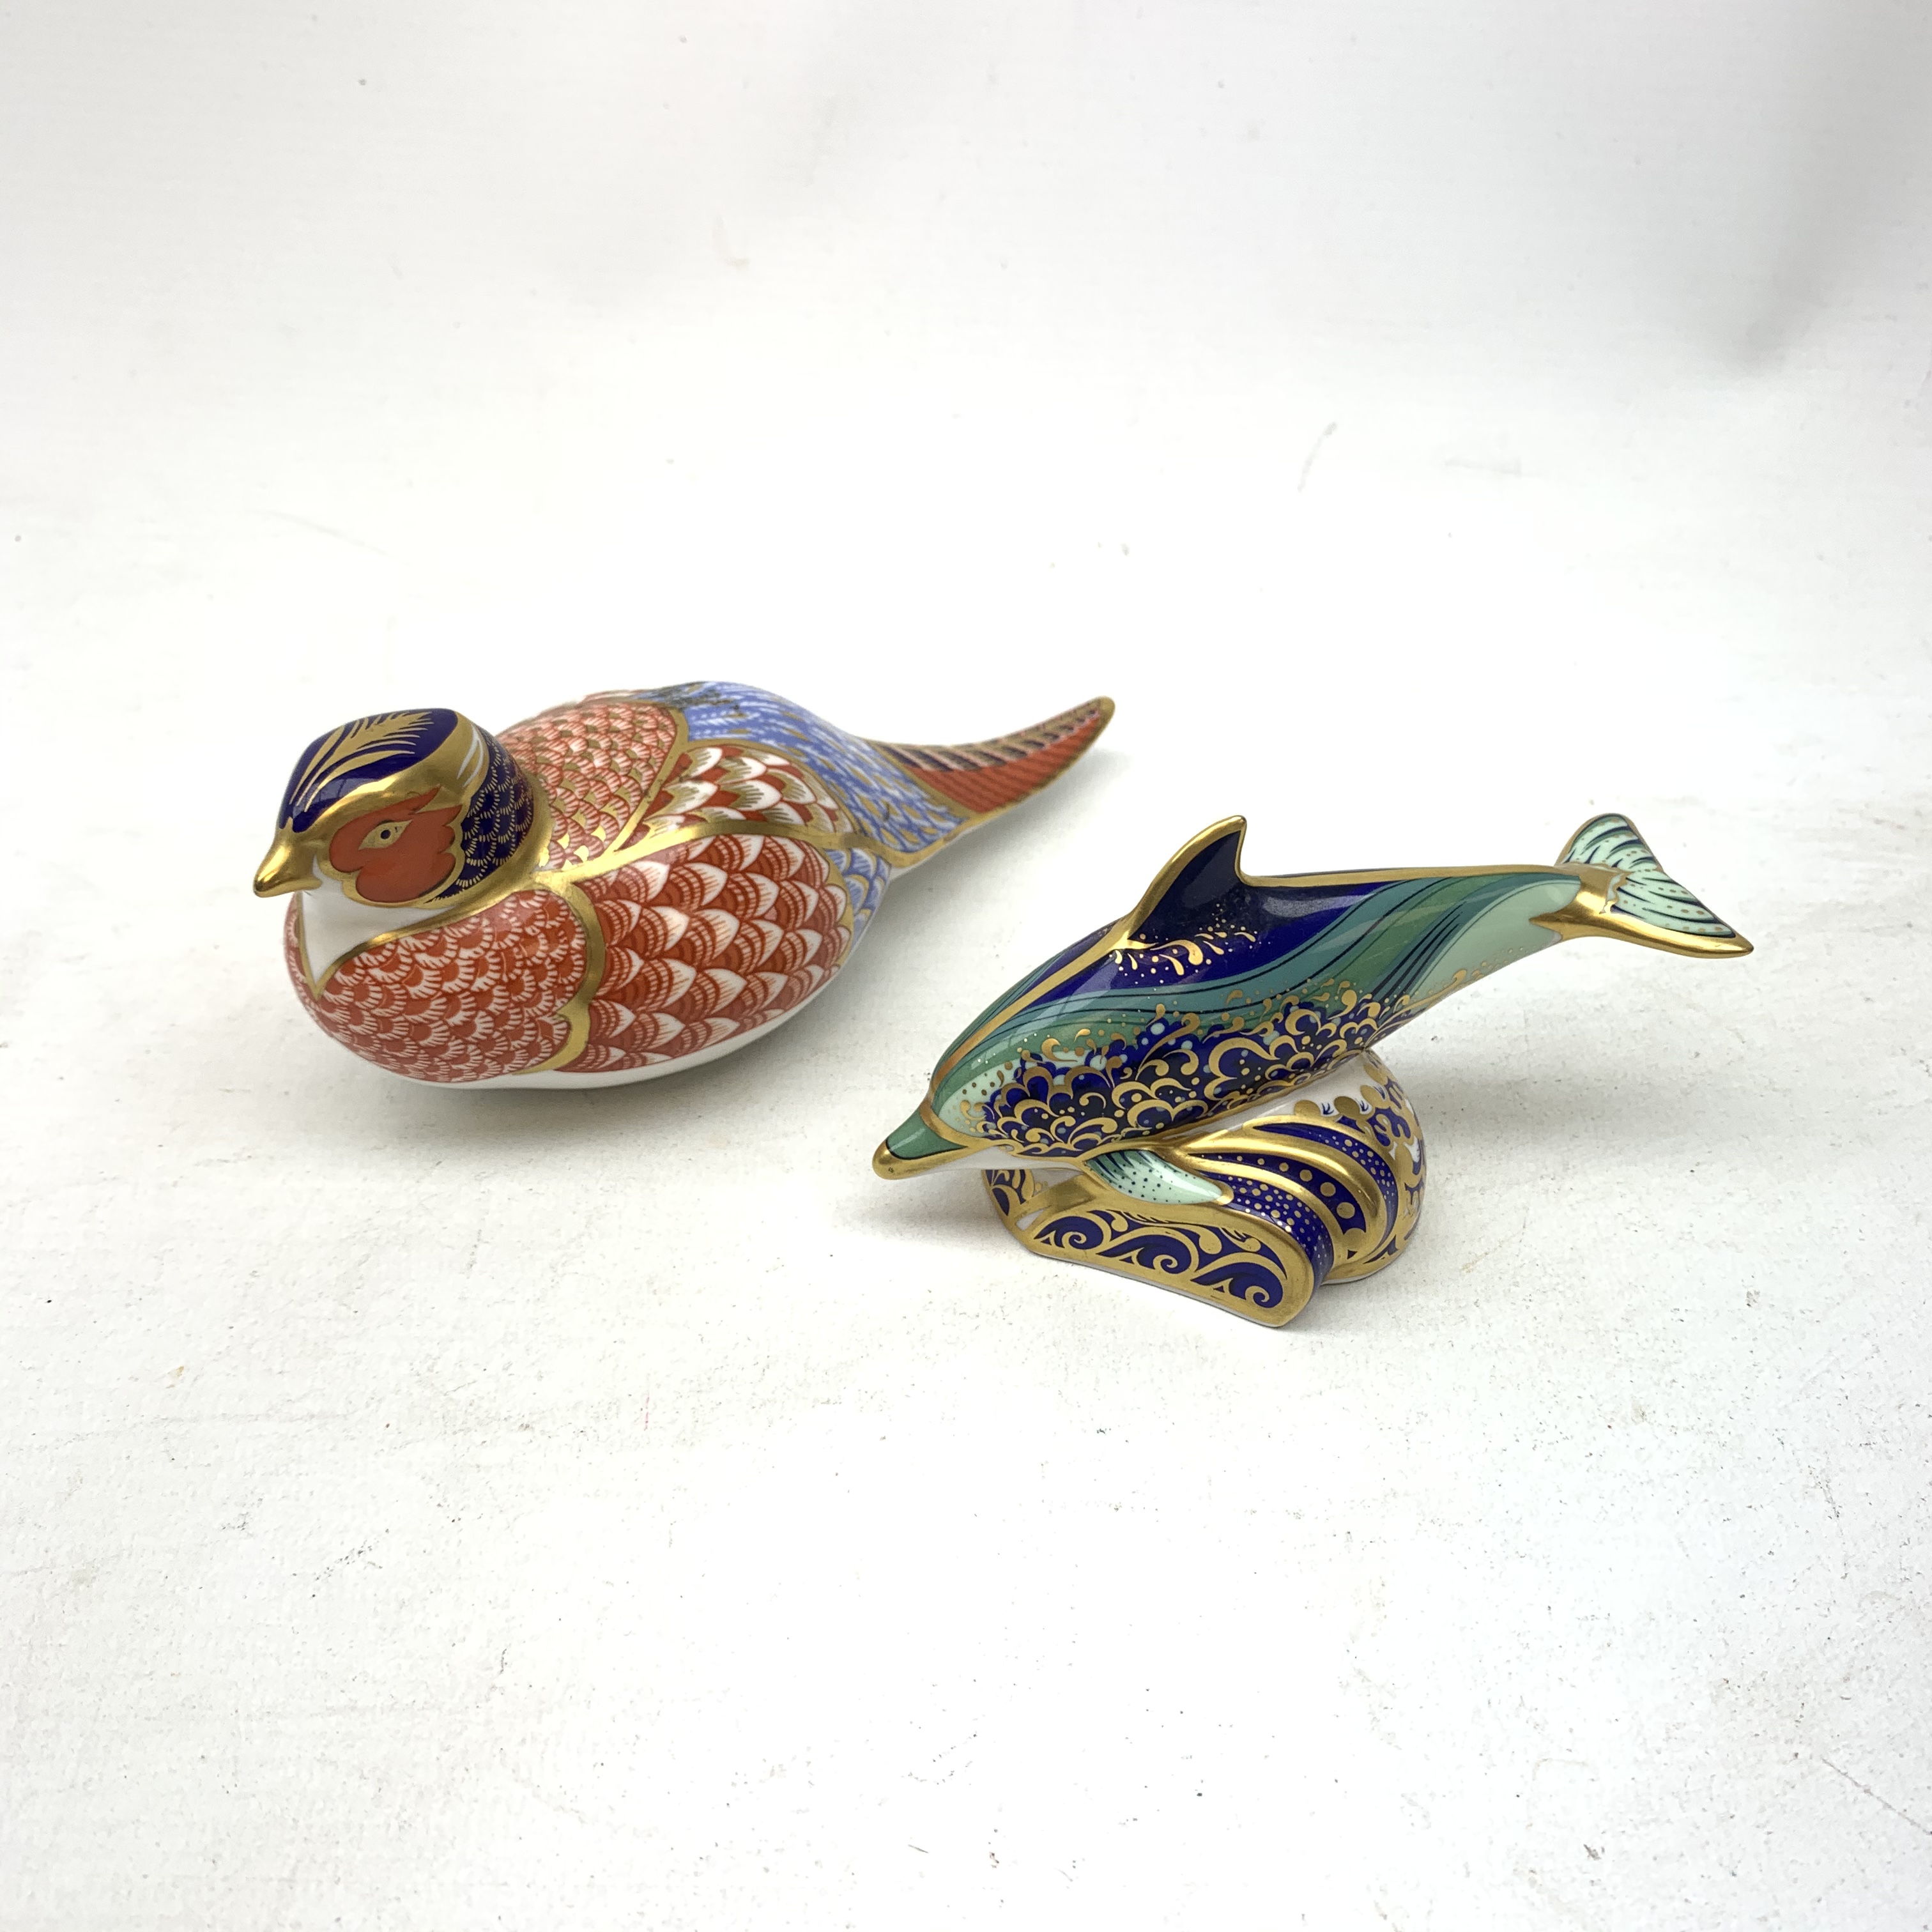 Two Royal Crown Derby paperweights, the first modelled as a Pheasant, the second as a Baby Bottlenos